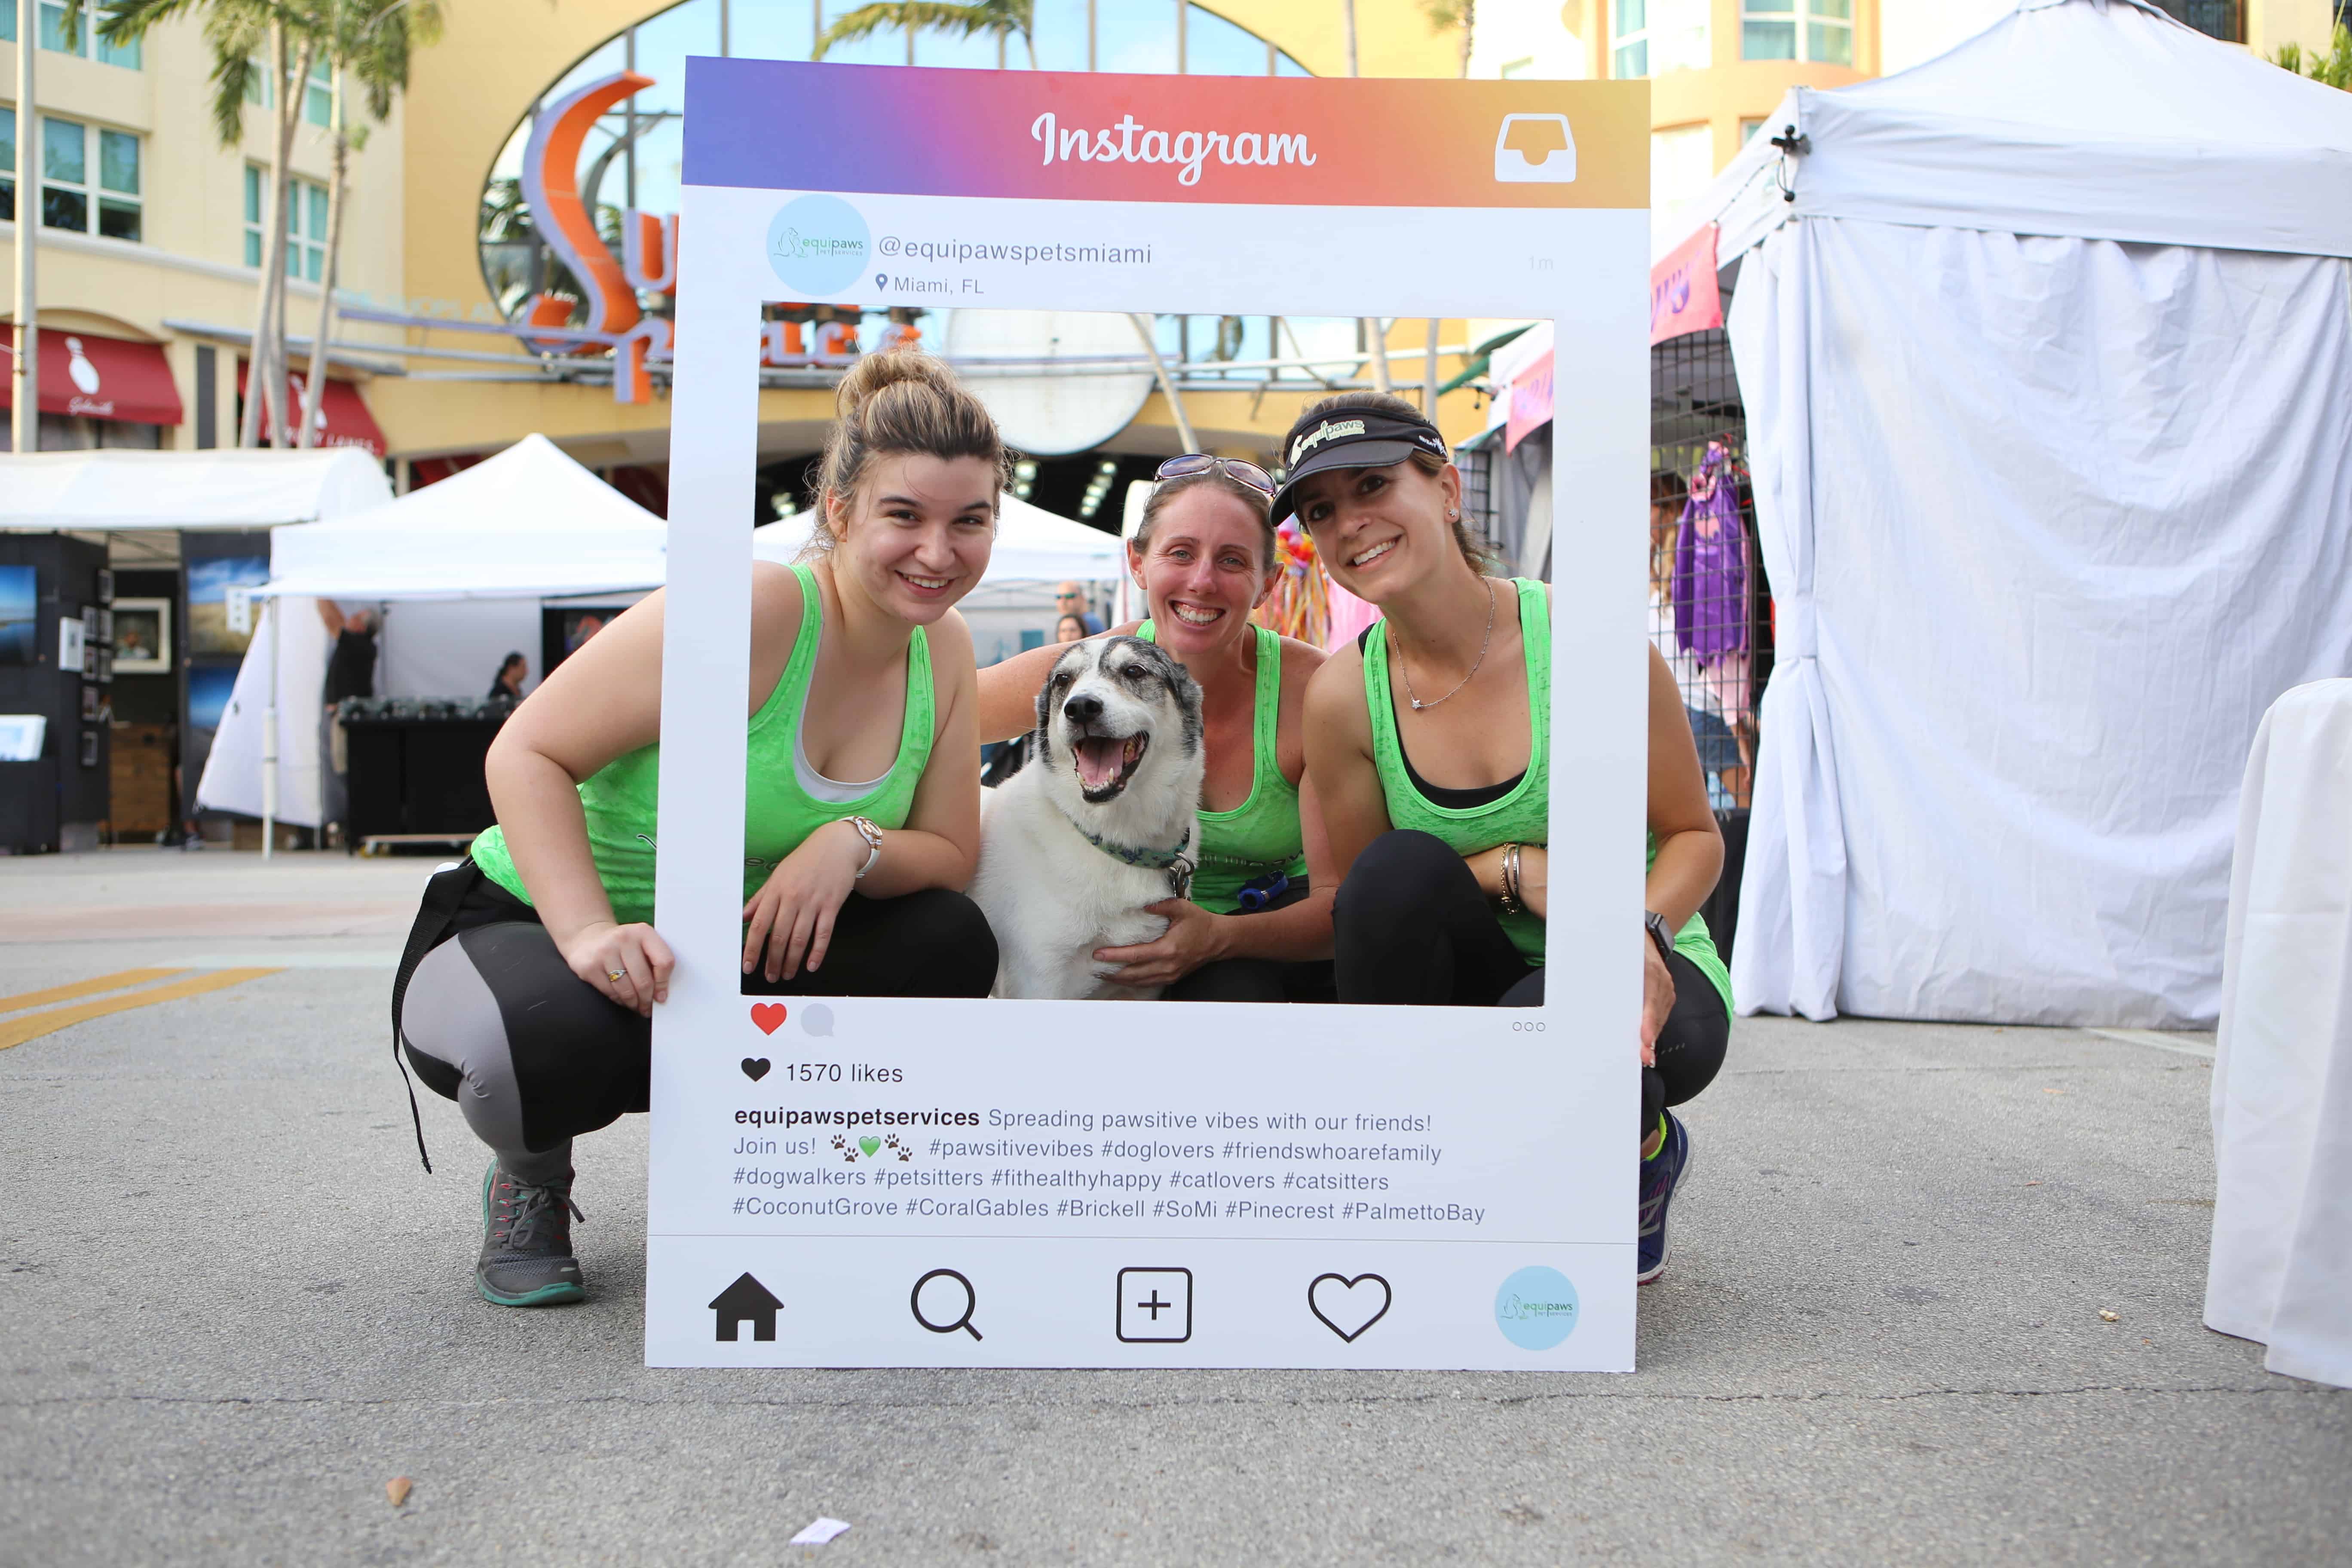 Equipaws team posing with an Instagram frame at the South Miami Rotary Art Festival